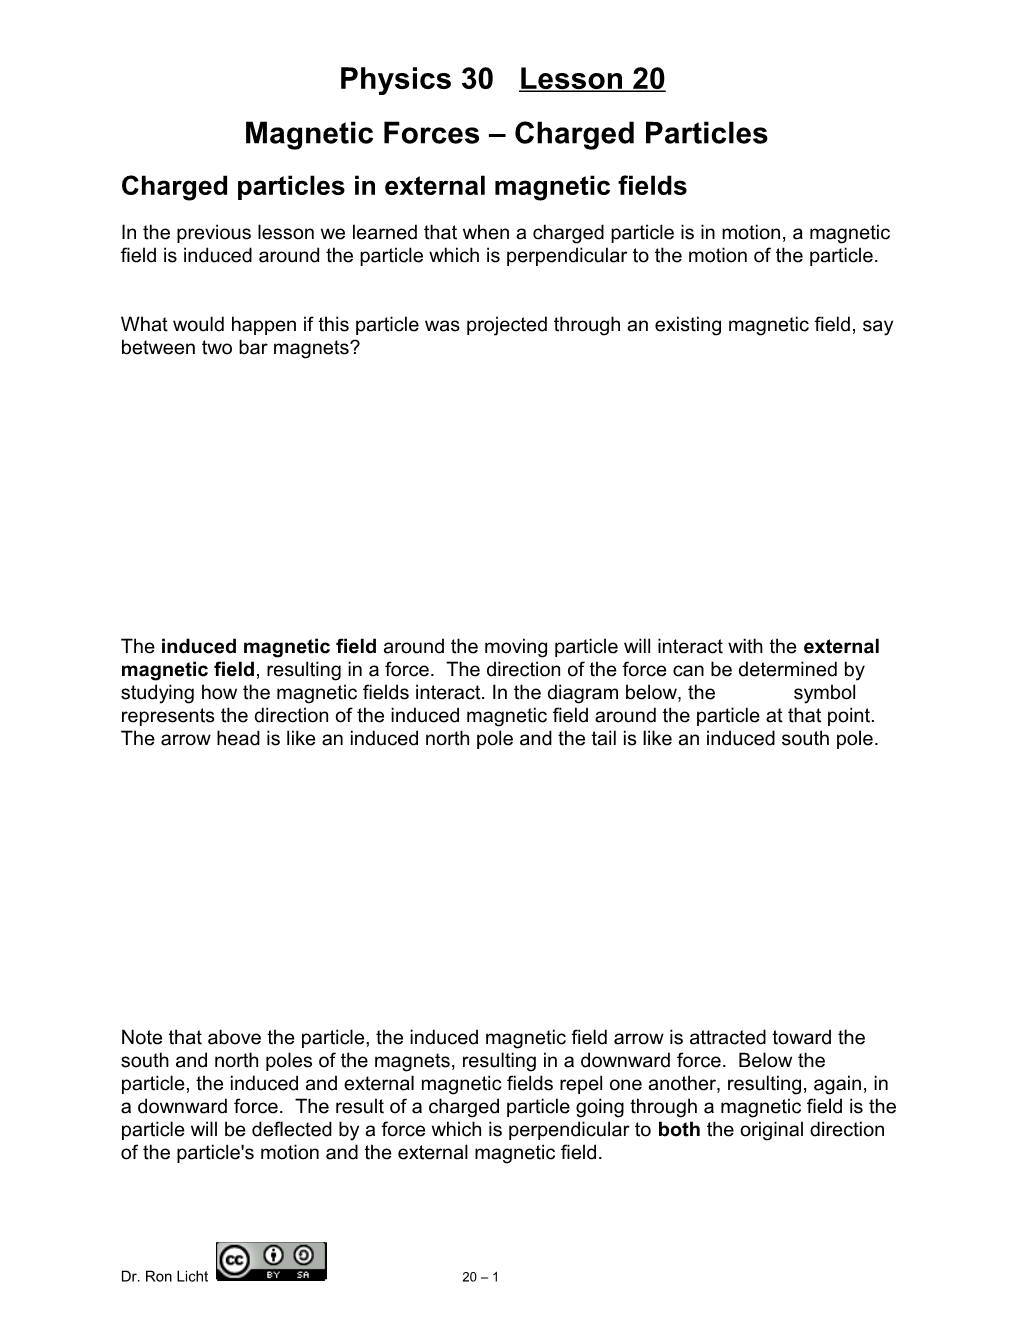 Magnetic Forces Charged Particles